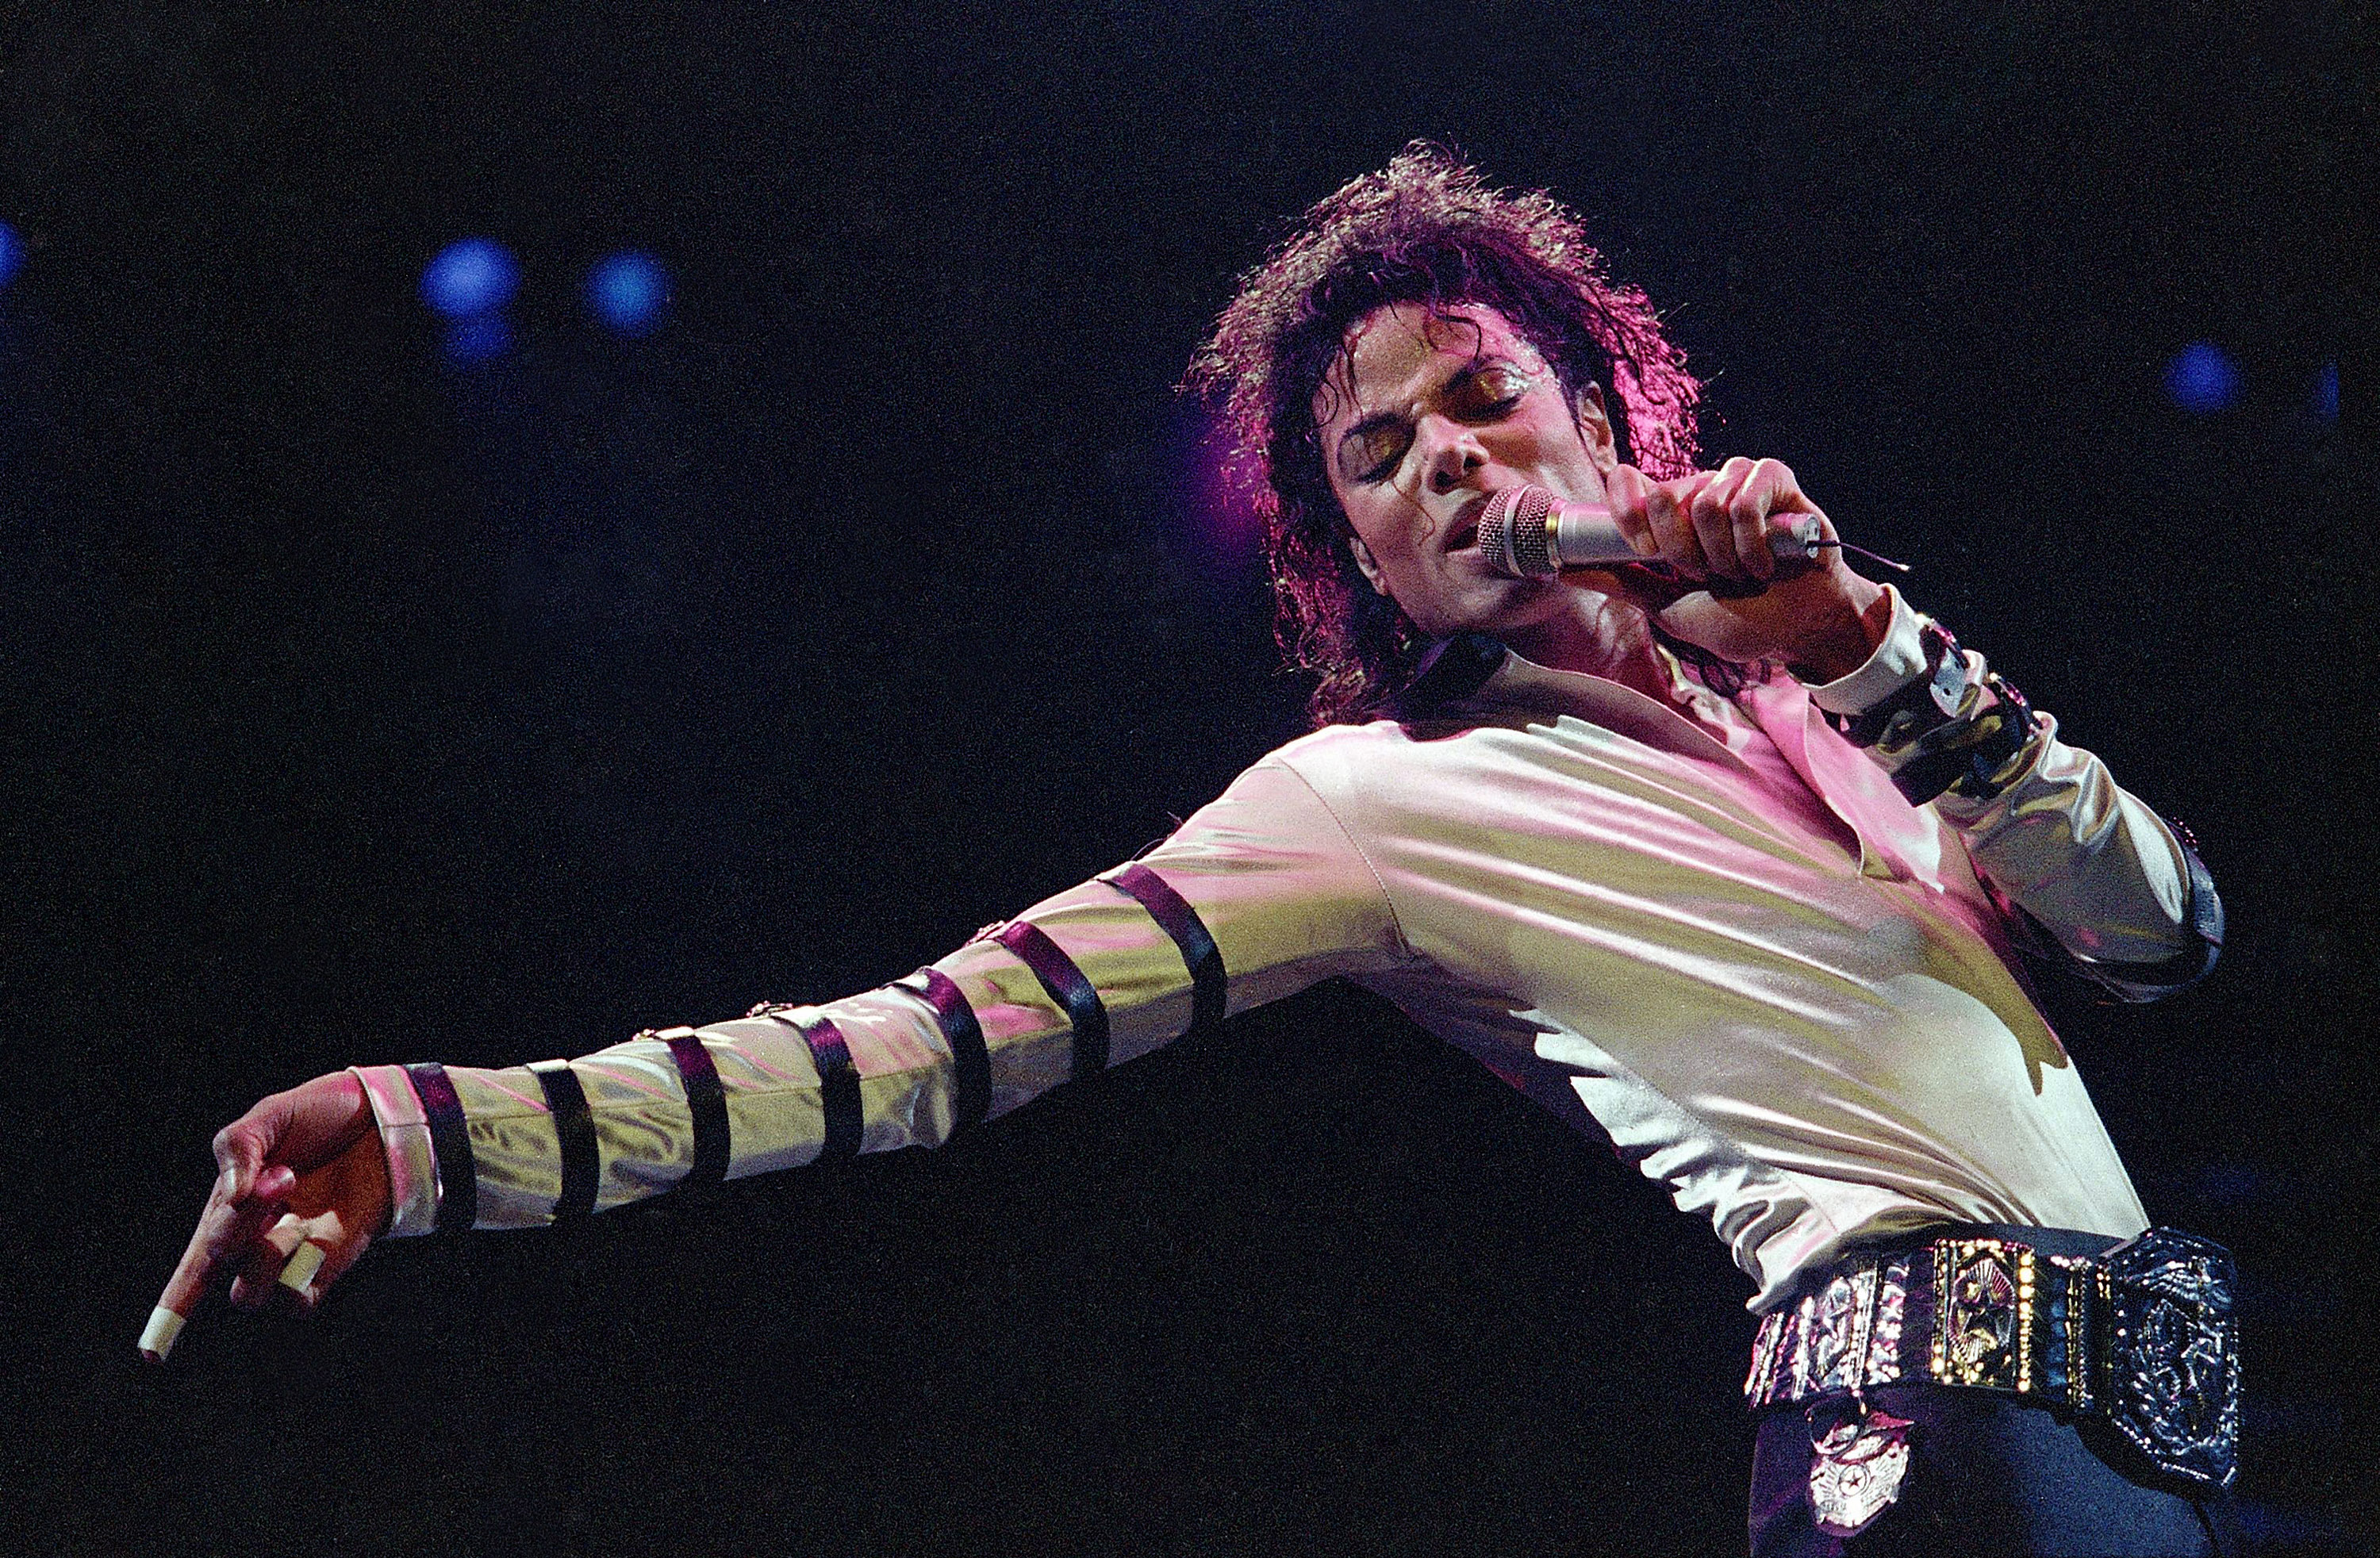 Michael Jackson's 'Thriller' is first to sell 30 million in U.S.